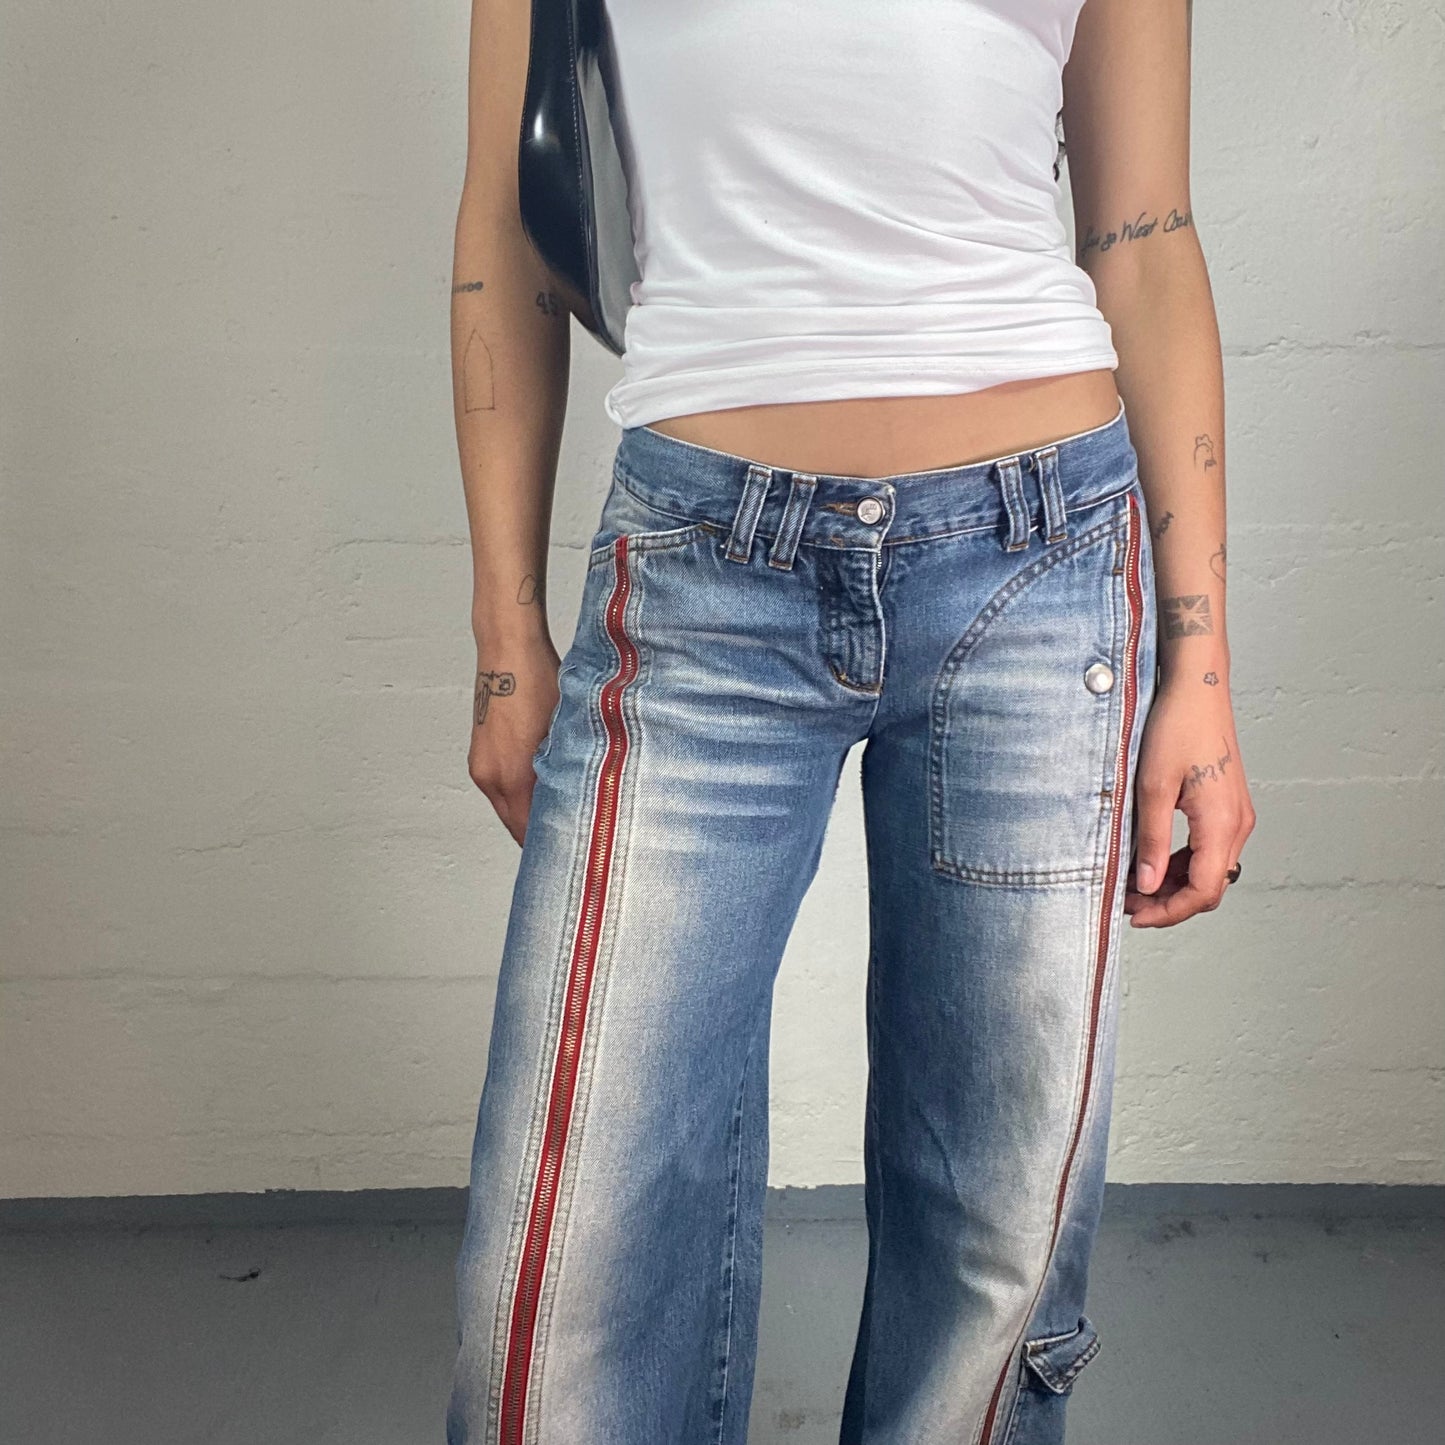 Vintage 2000's Skater Girl Light Blue Washed Off Denim Low Waisted Straight Cut Jeans with Red Zipper Details (M)